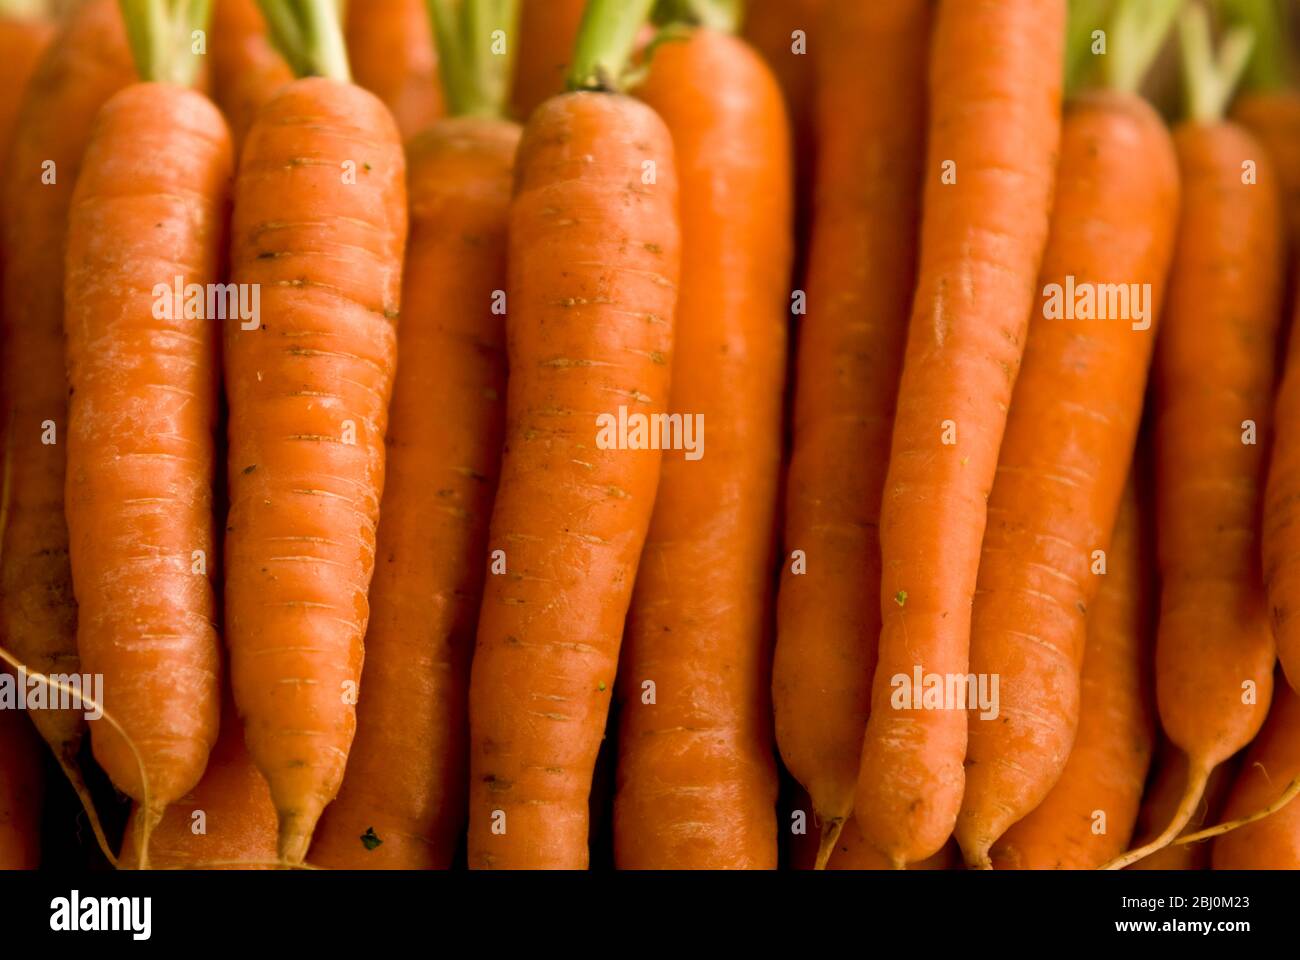 Close up of carrots lined up. - Stock Photo